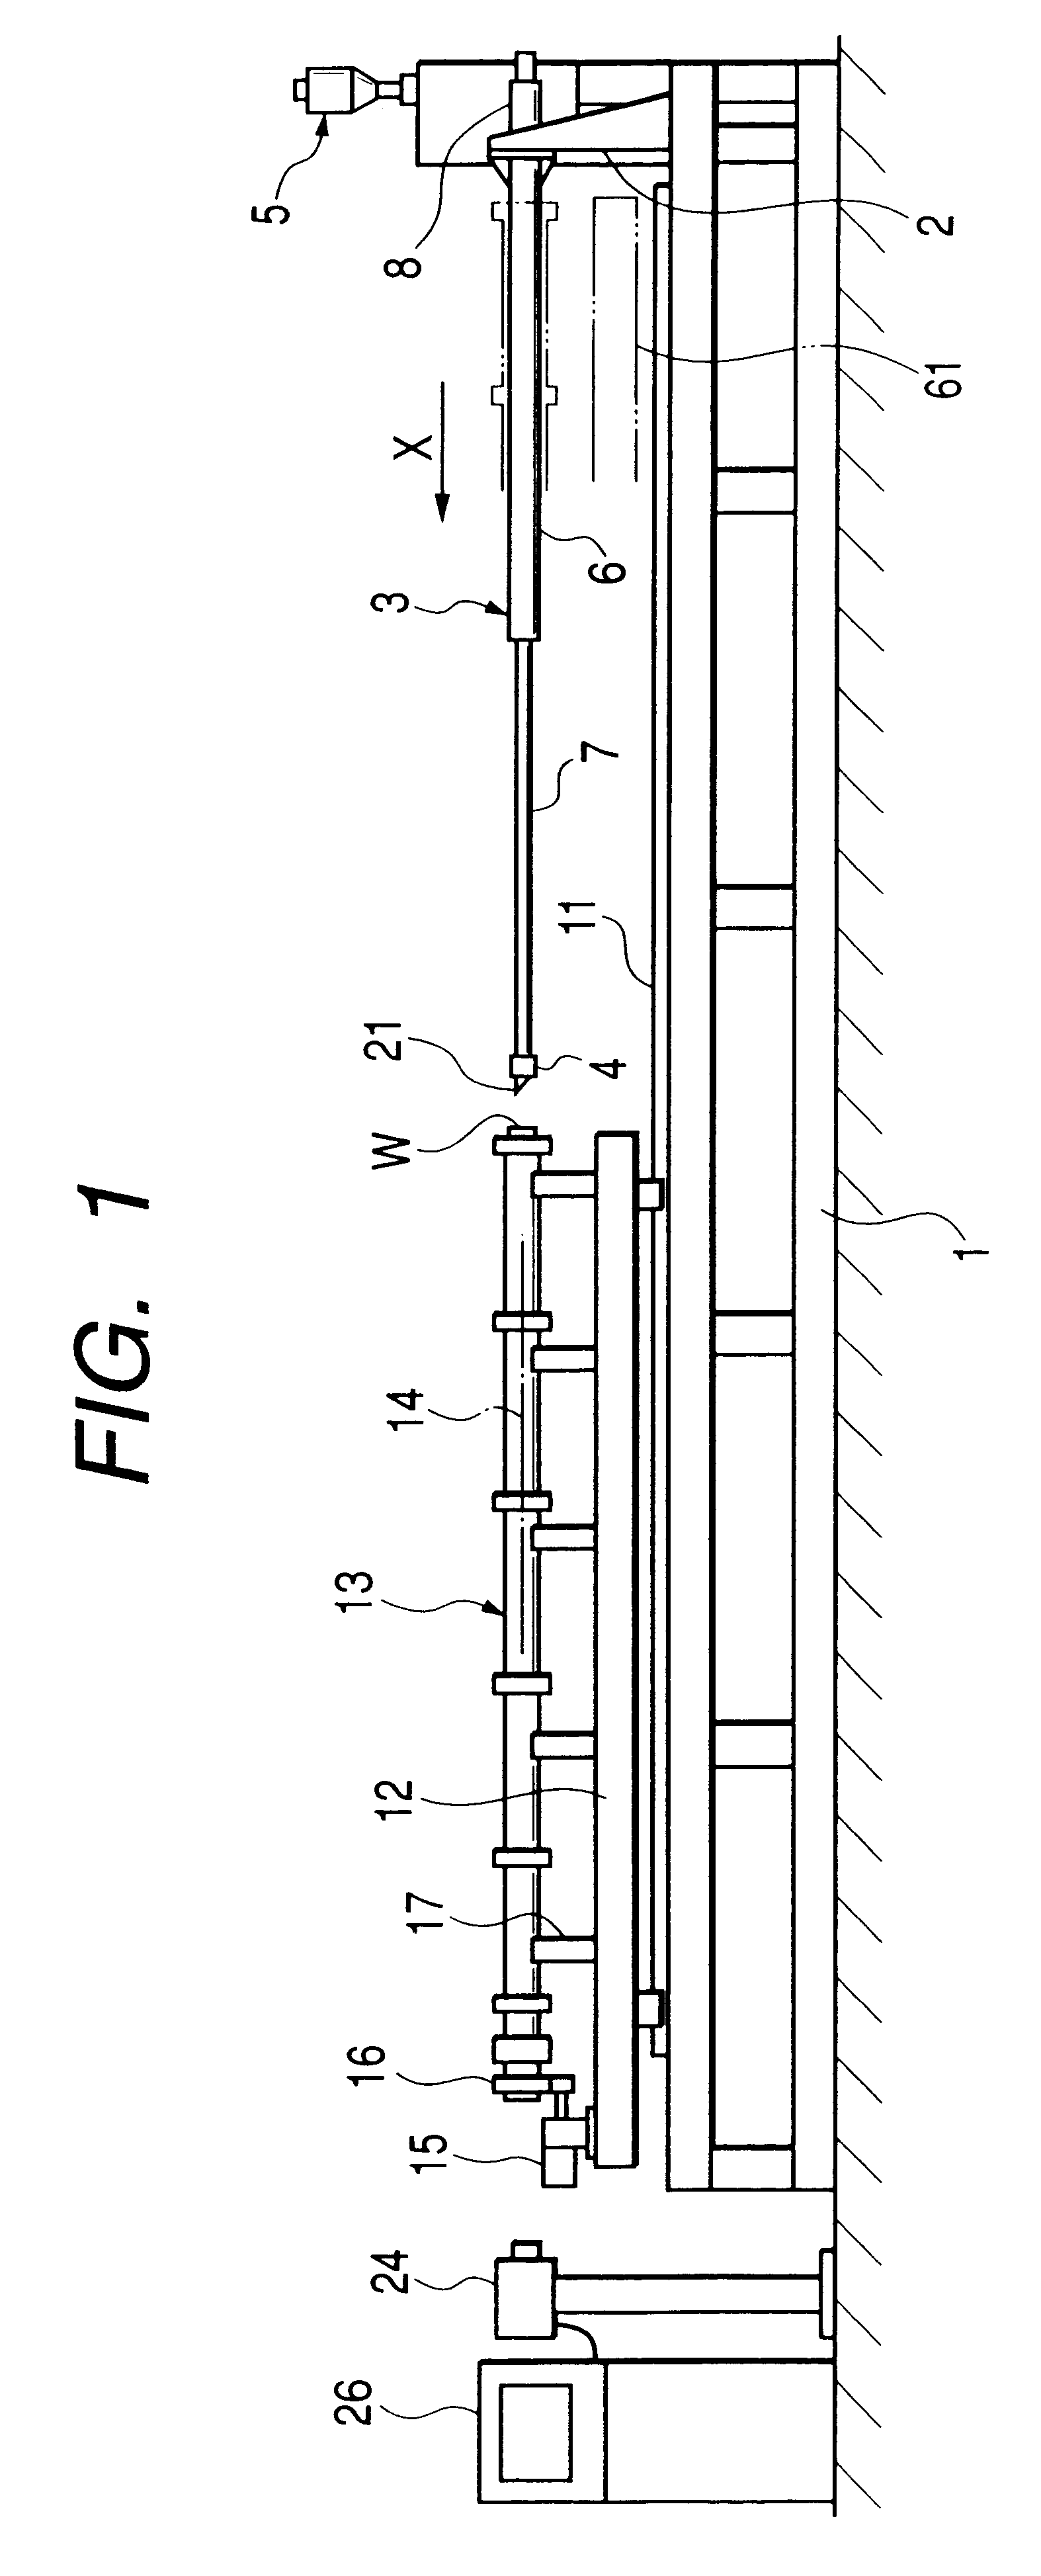 Internal metal pipe welding apparatus and monitoring system